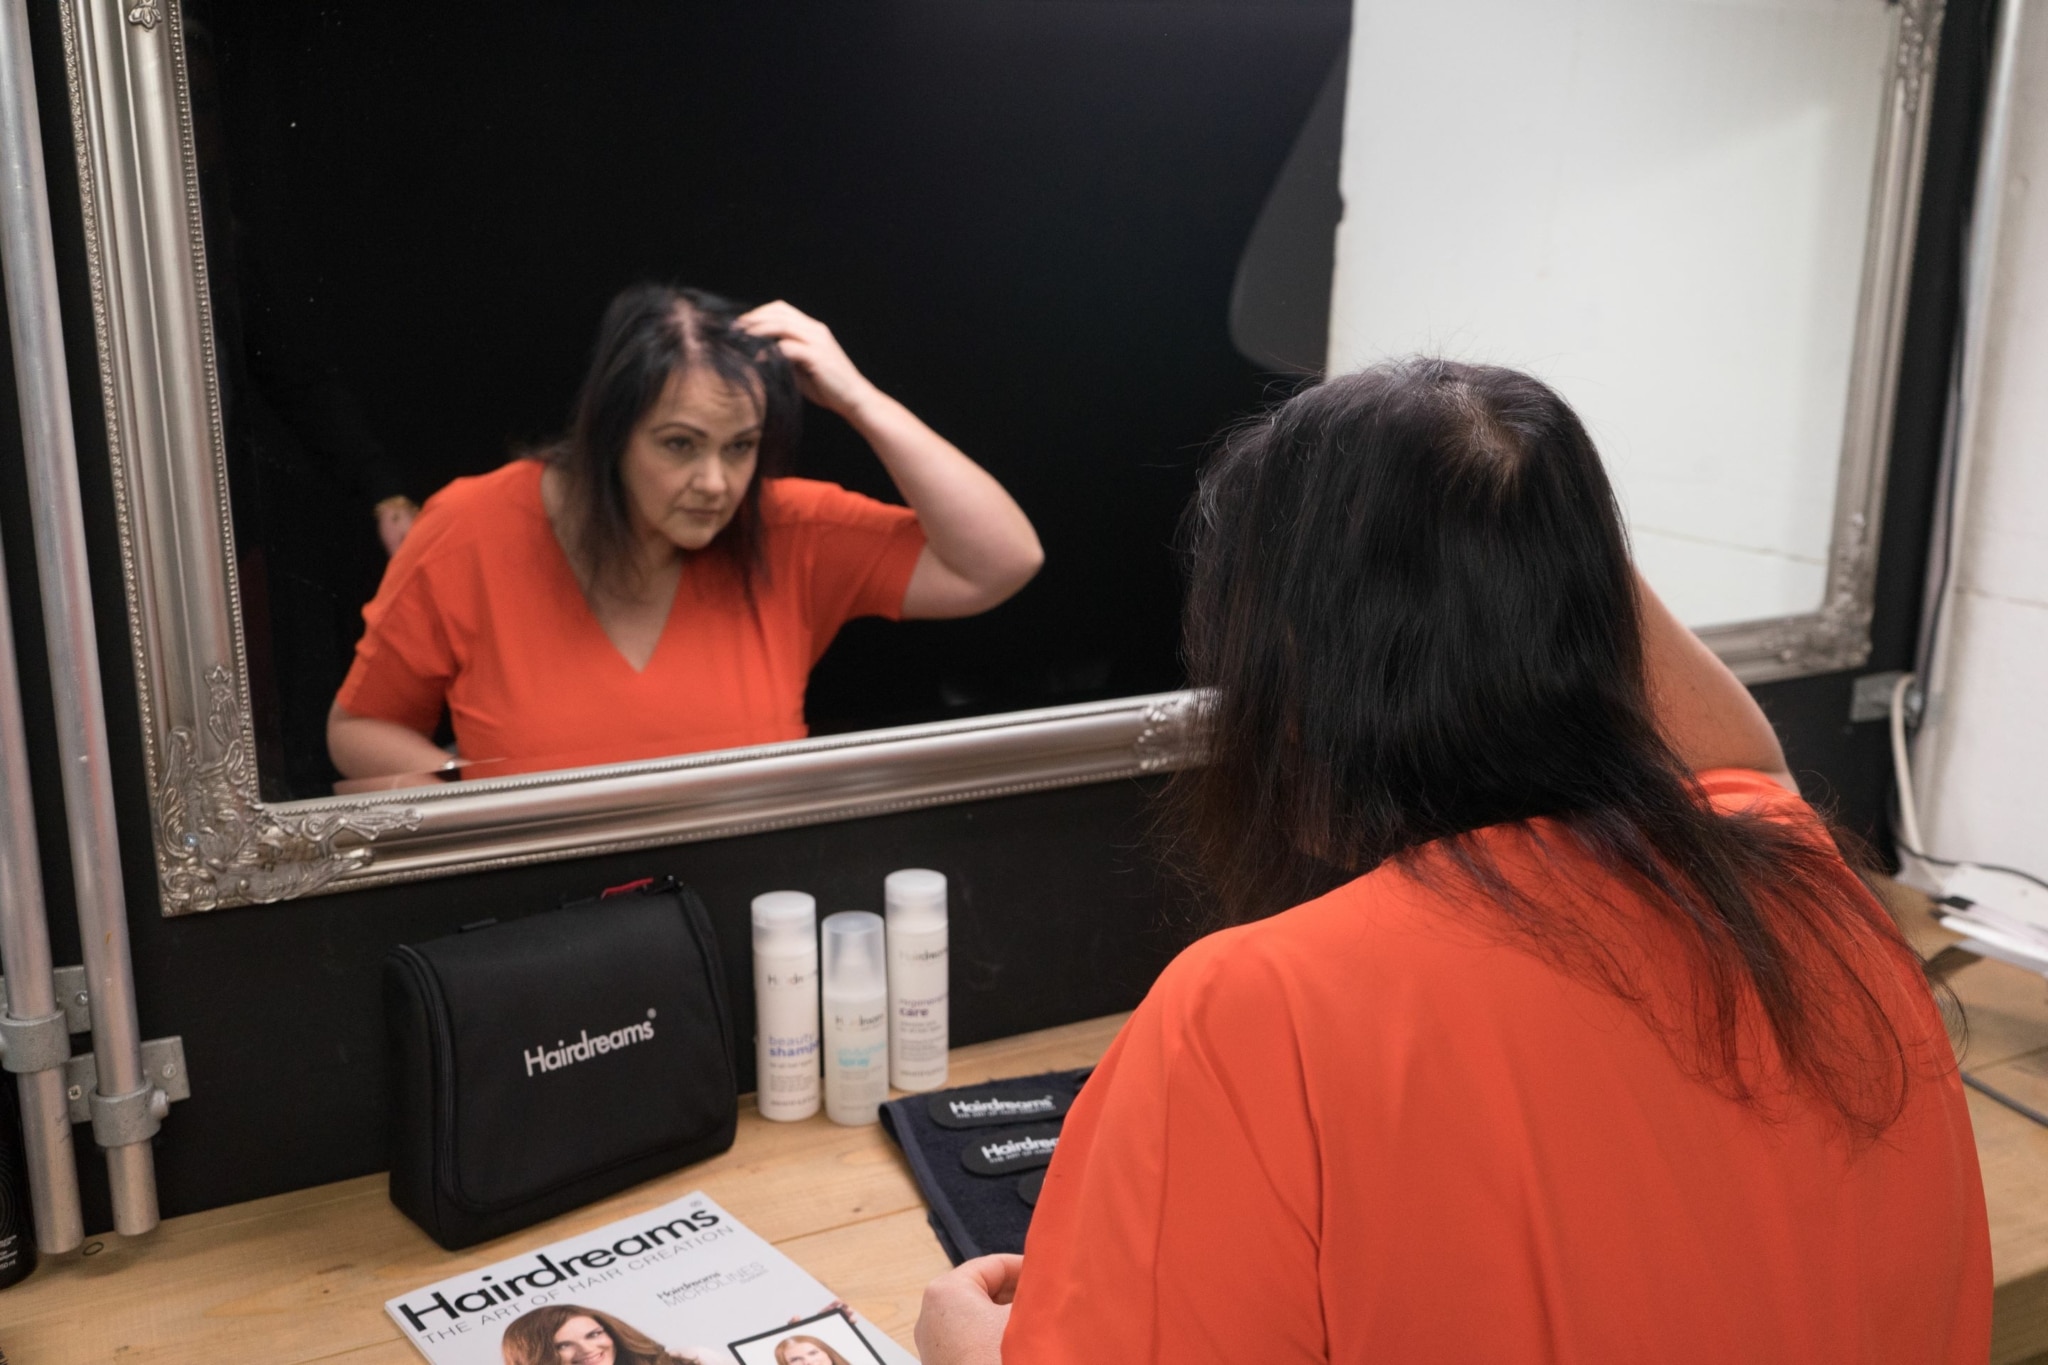 Woman with thinning black hair looks at herself in the mirror